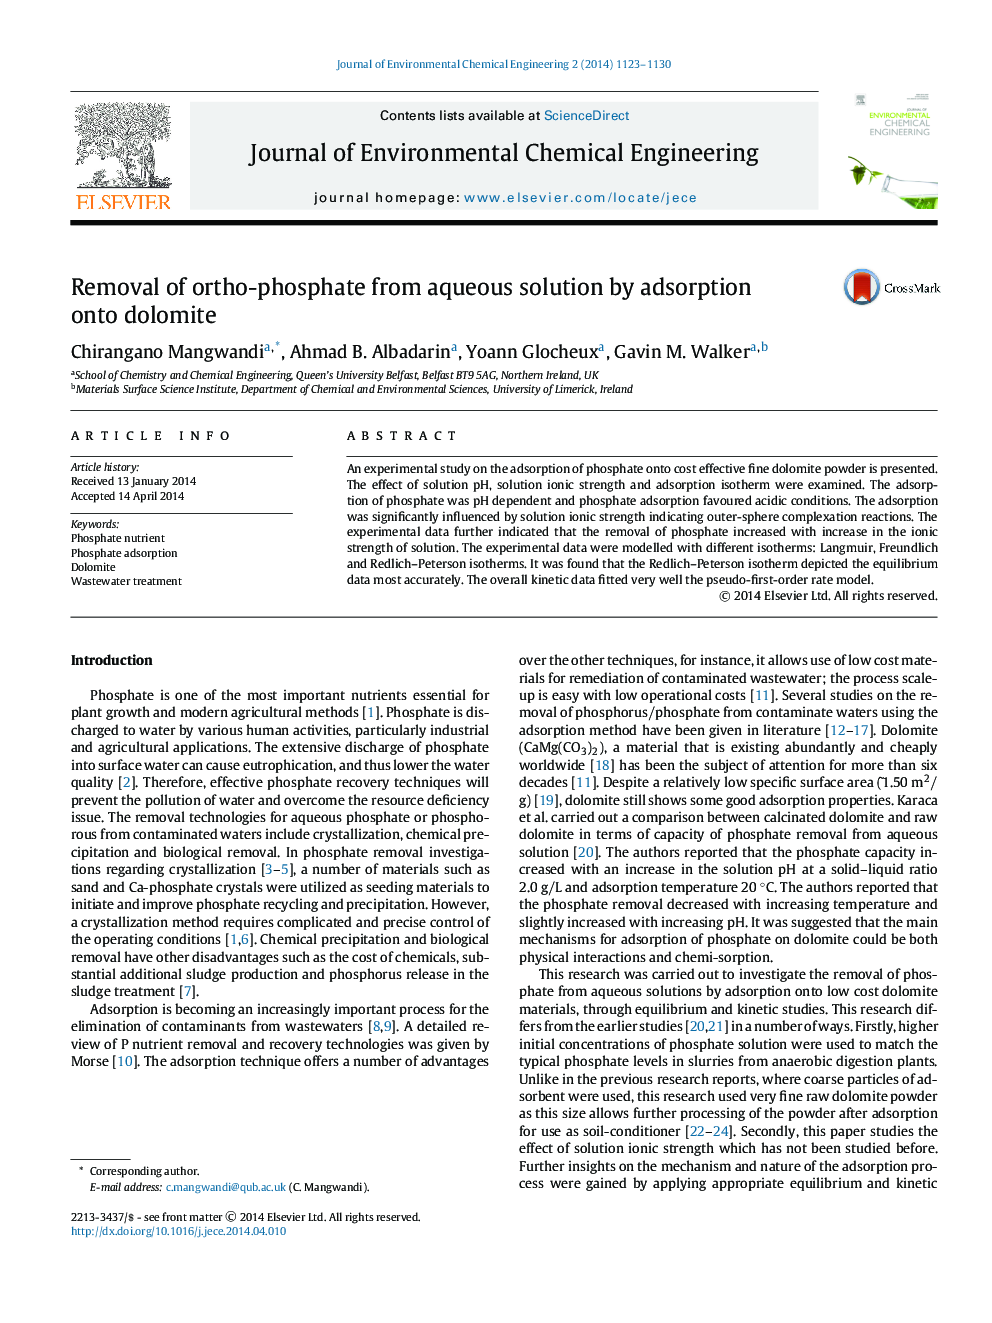 Removal of ortho-phosphate from aqueous solution by adsorption onto dolomite